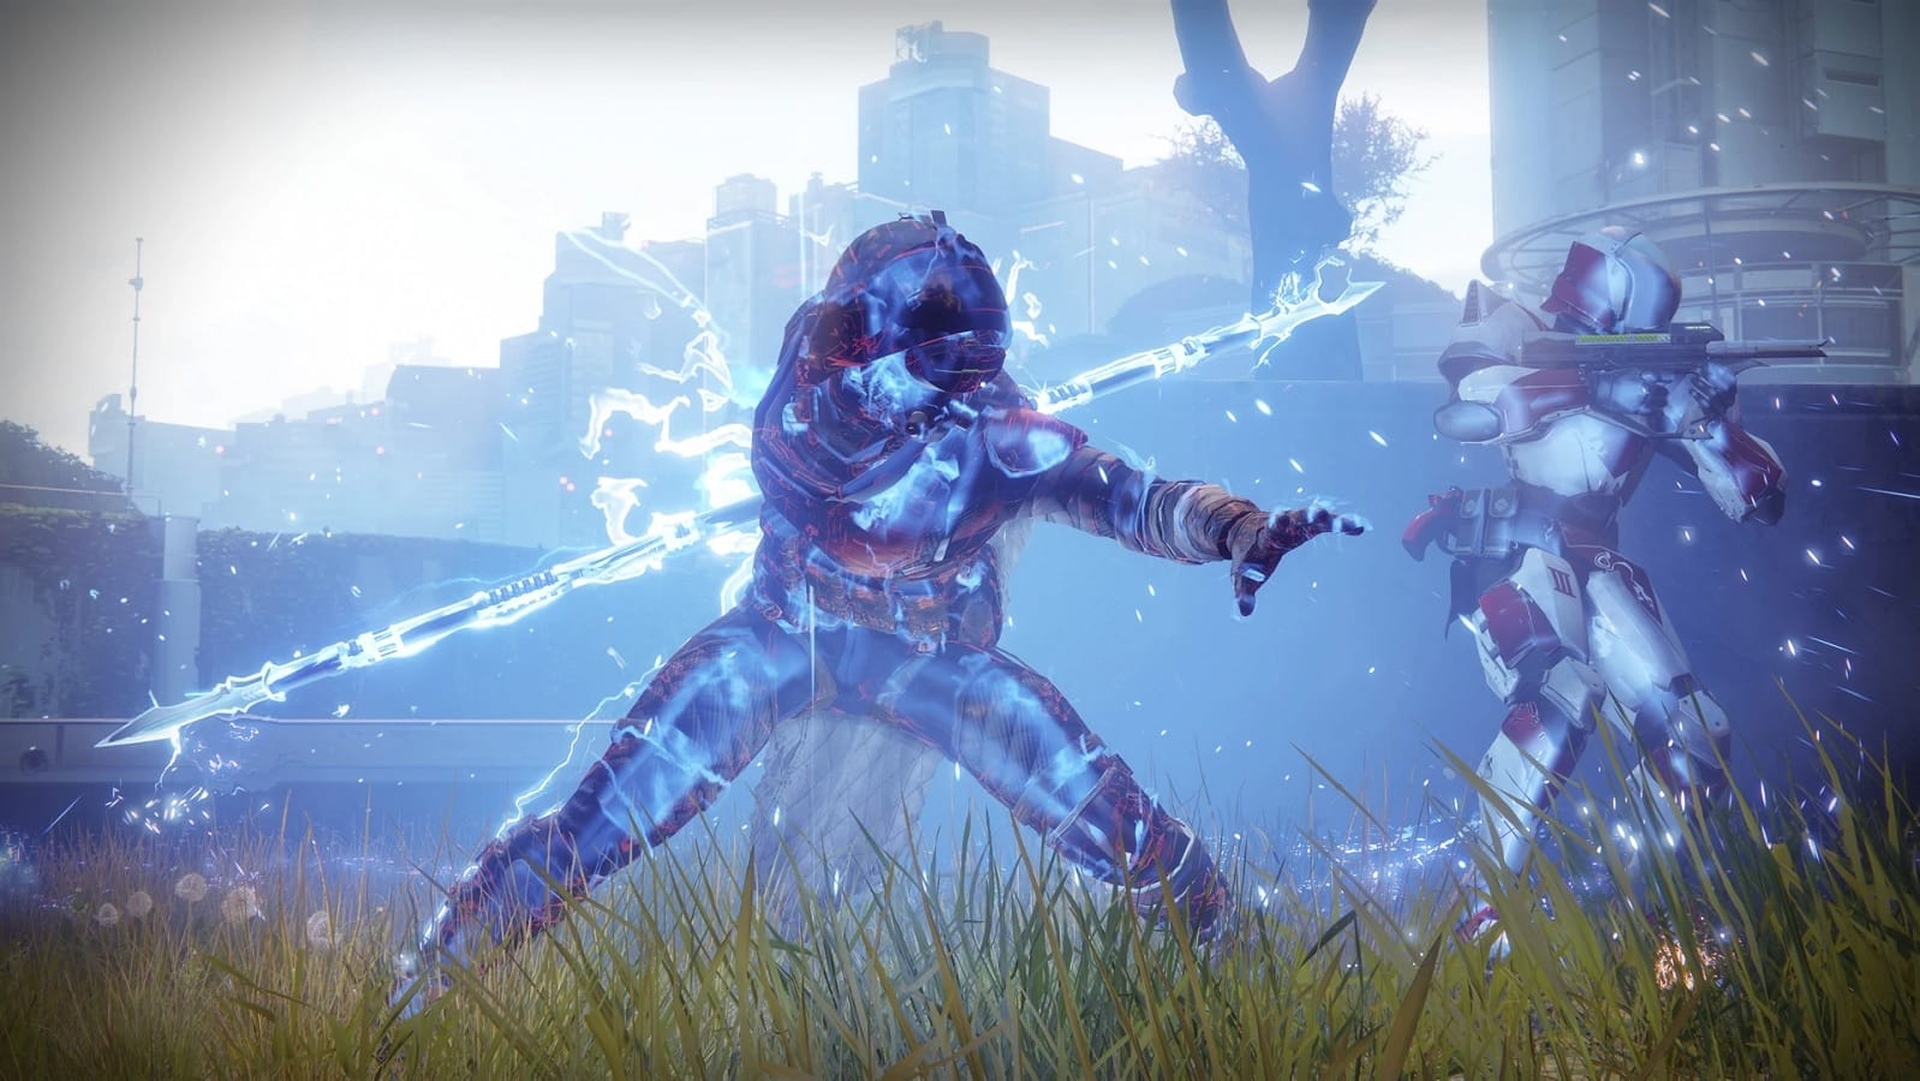 There are many new features and changes coming with the Destiny 2 Season 18 update, and we will be covering all there is to know about it.